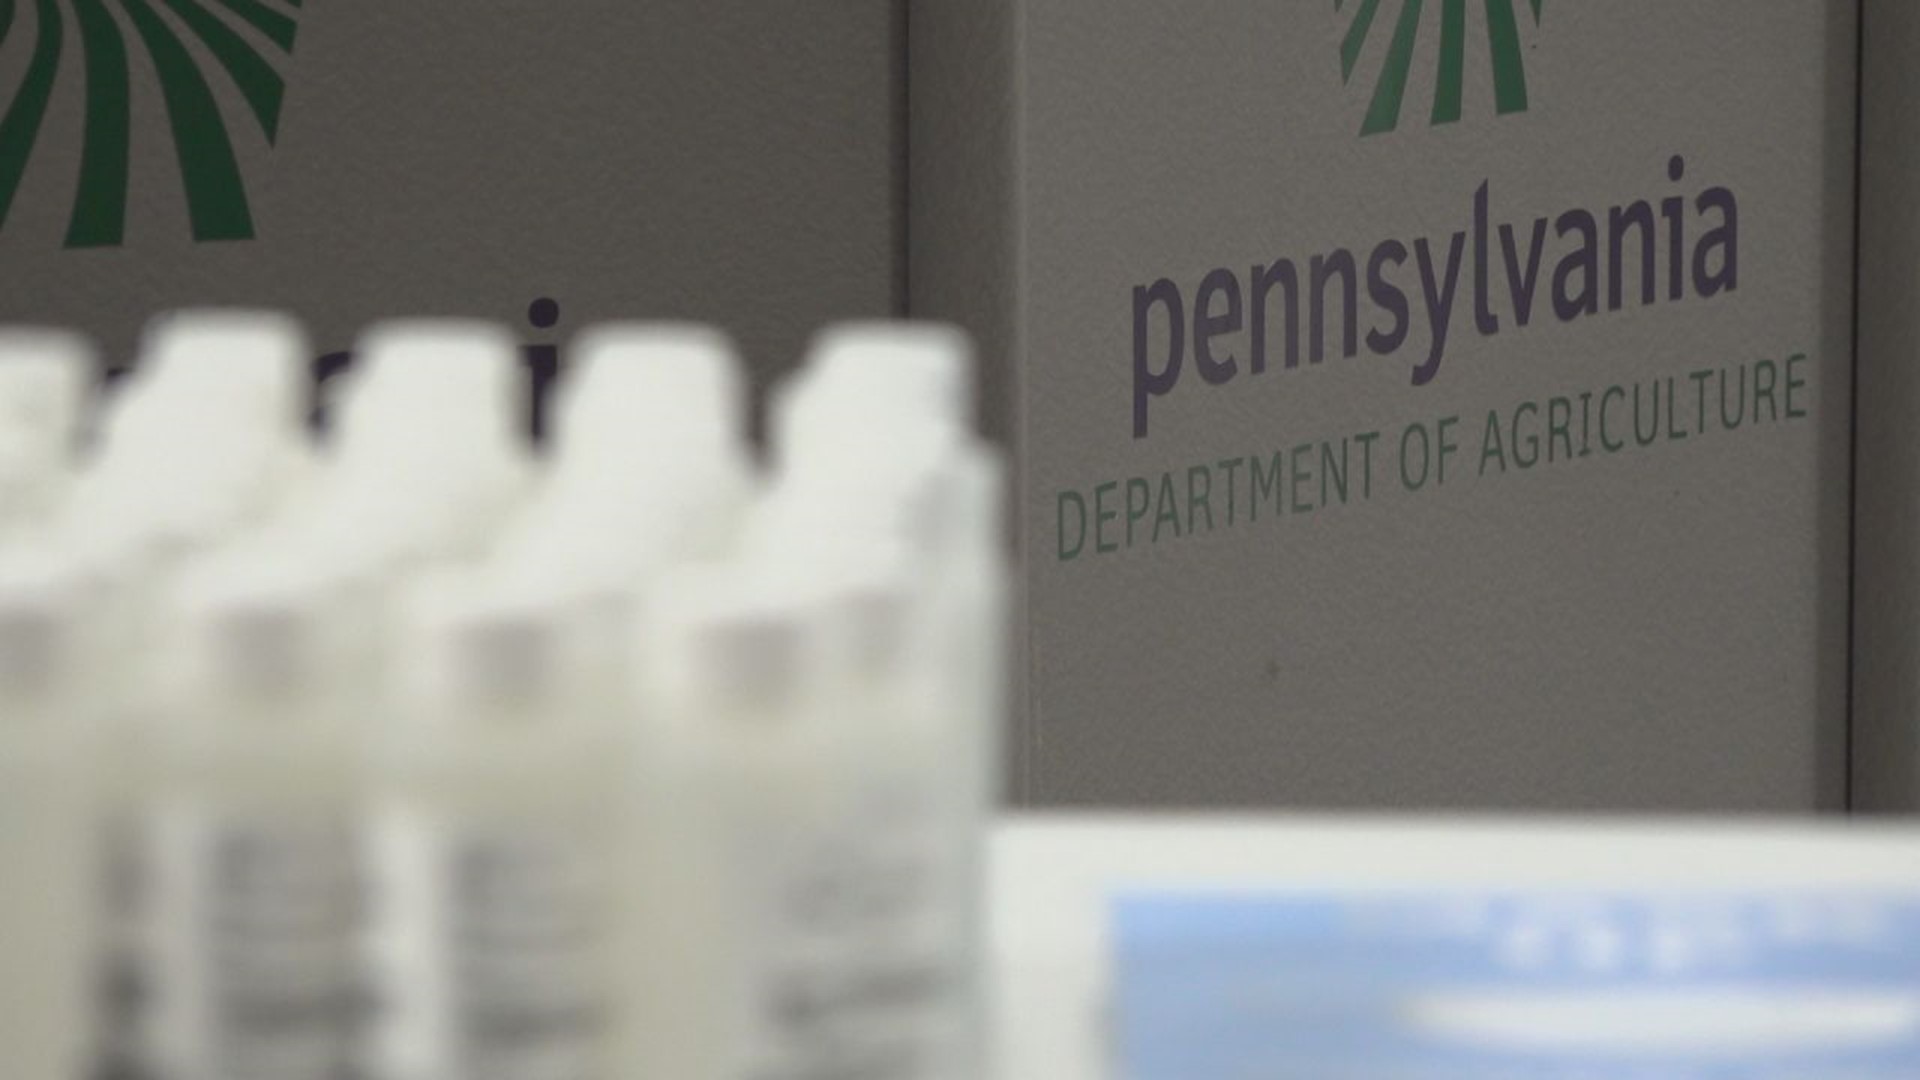 Pennsylvania Department of Agriculture Russell Redding says additional safety measures have been put in place to enhance safety.